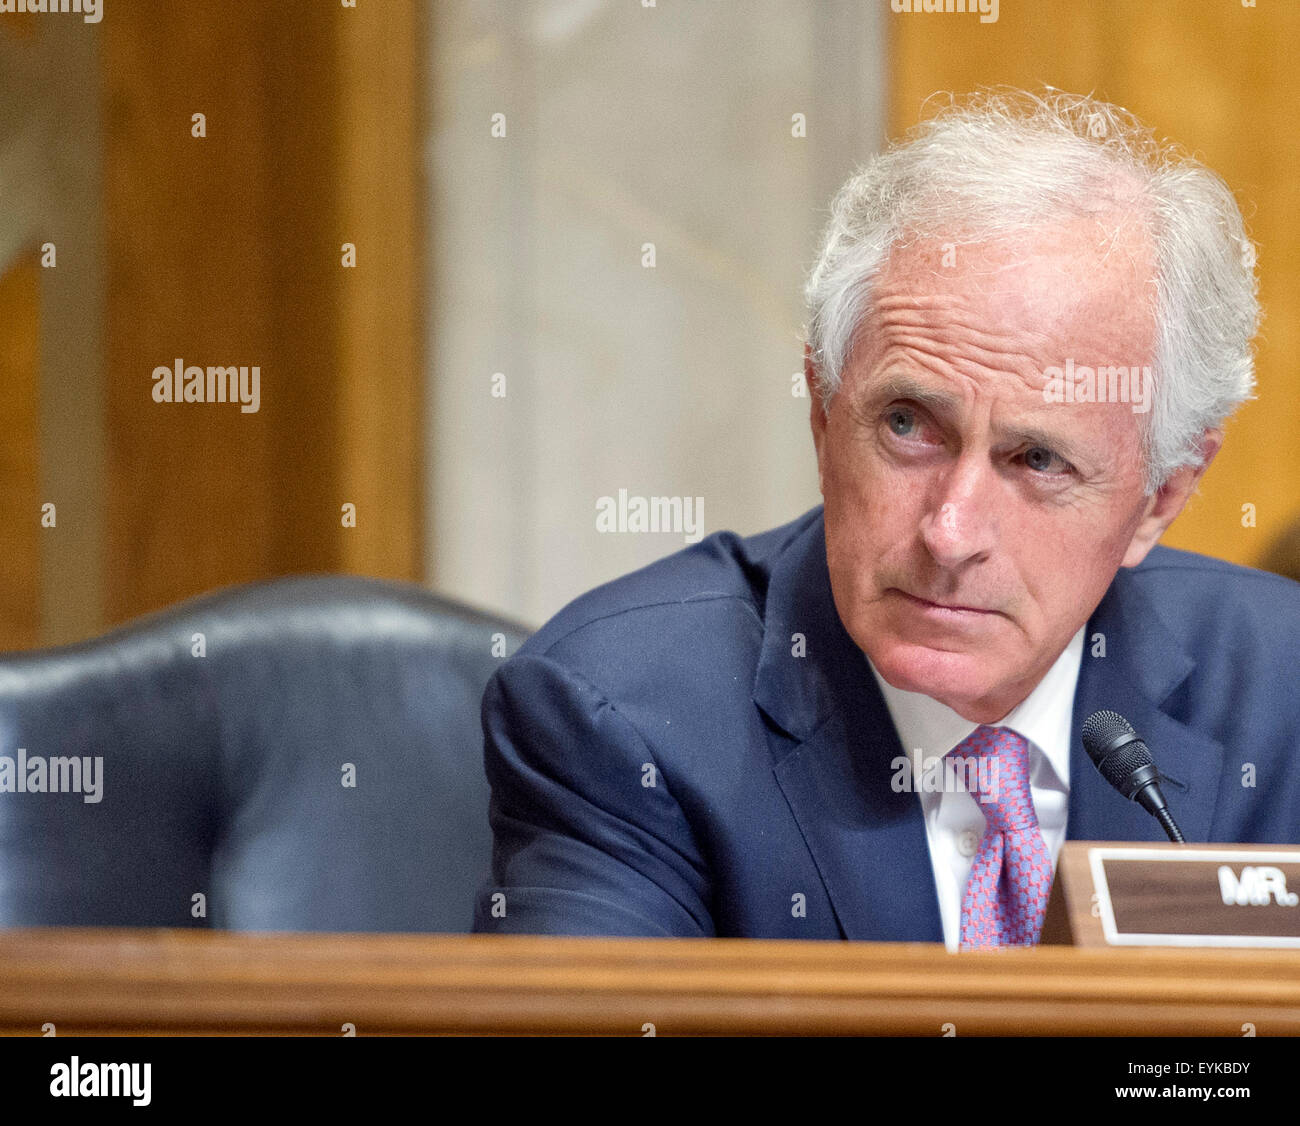 United States Senator Bob Corker (Republican of Tennessee), Chairman, US Senate Committee on Foreign Relations listens to testimony concerning 'Sanctions and the Joint Comprehensive Plan of Action (JCPOA)' on Capitol Hill on Wednesday, July 29, 2015. Credit: Ron Sachs/CNP - NO WIRE SERVICE - Stock Photo